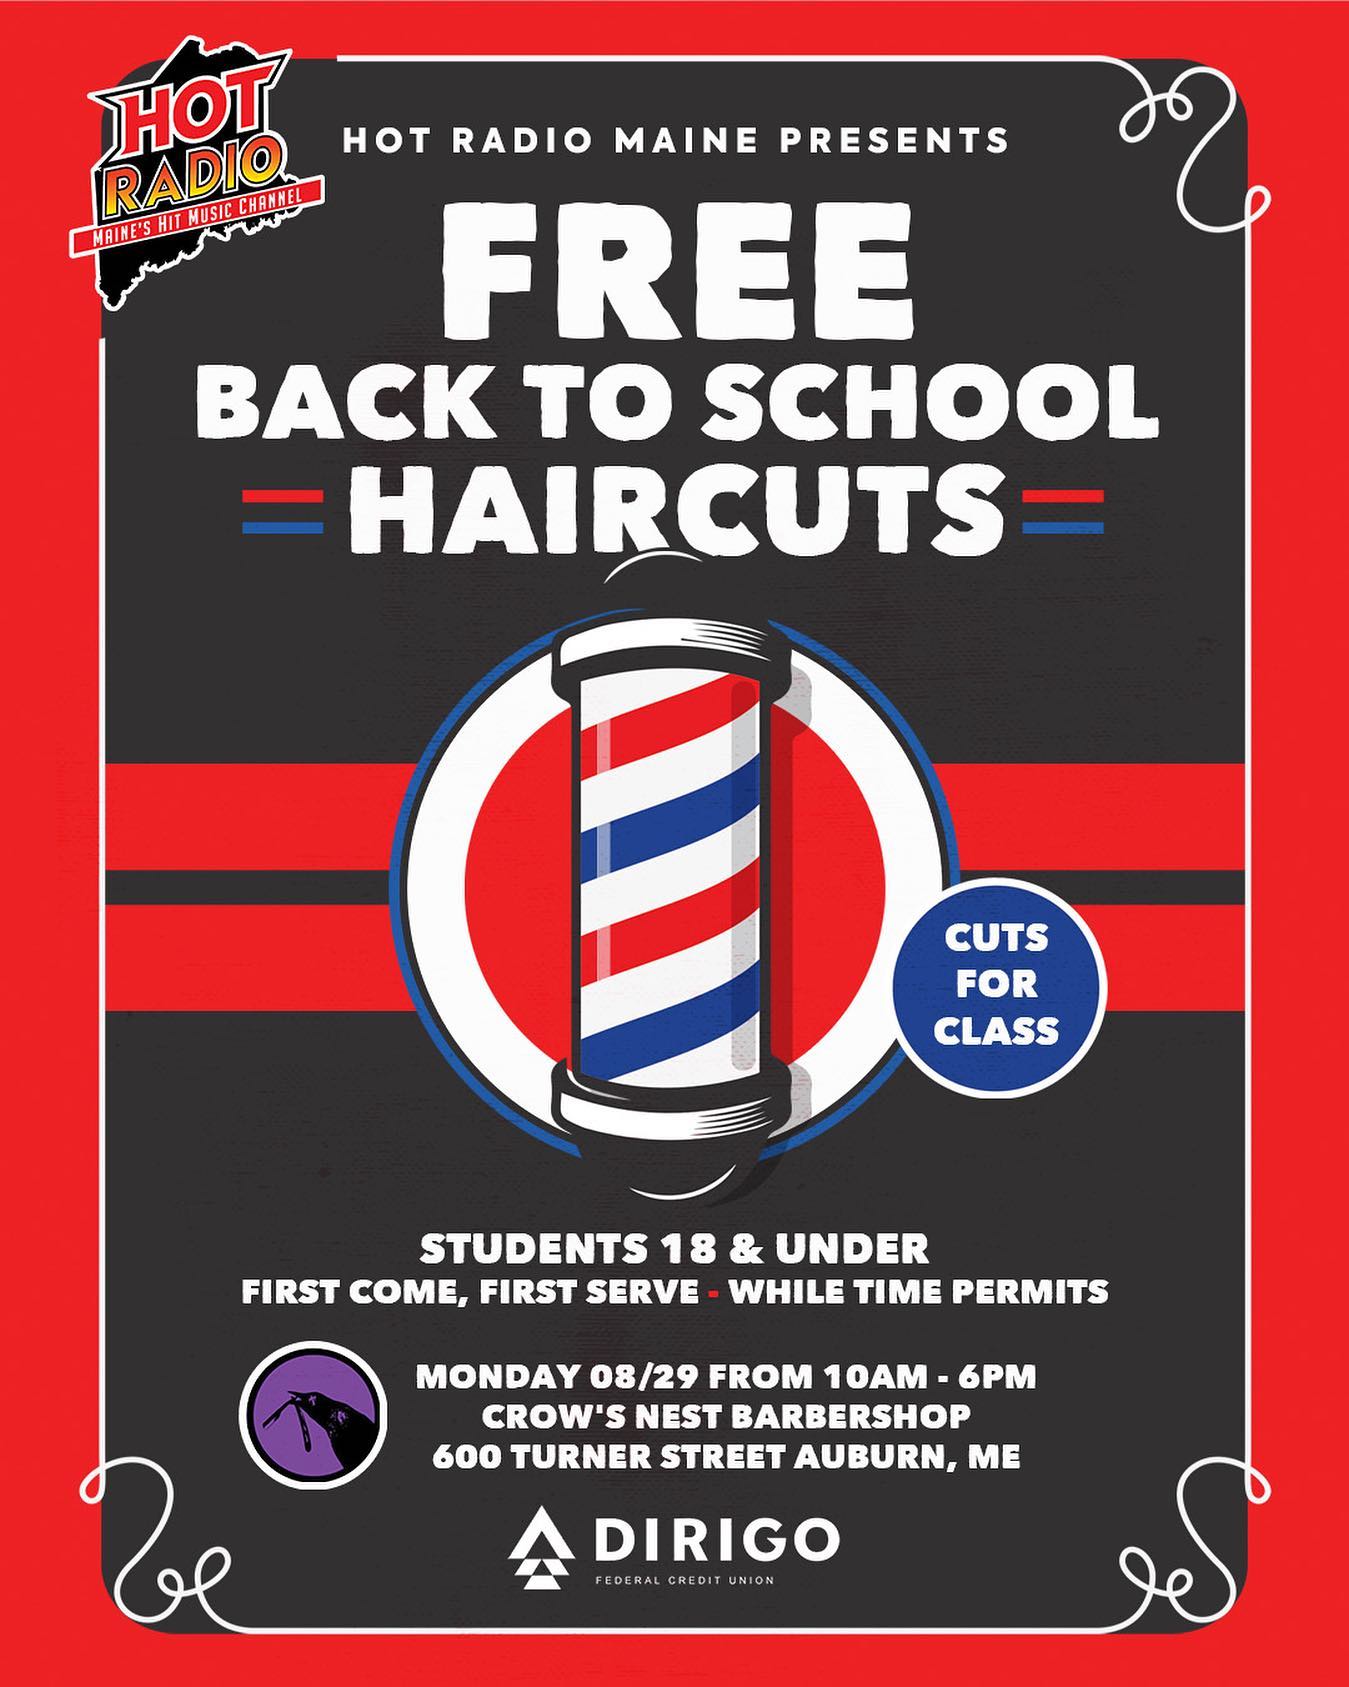 FREE BACK TO SCHOOL HAIRCUTS 💈 Our 2nd Annual Cuts for Class event is going down Monday 8/29 at @crowsnestauburn from 10a-6p.  Free Cuts for Students 18 & Under.  First come first serve.  While time permits. Made Hot in Maine by @dirigofcu